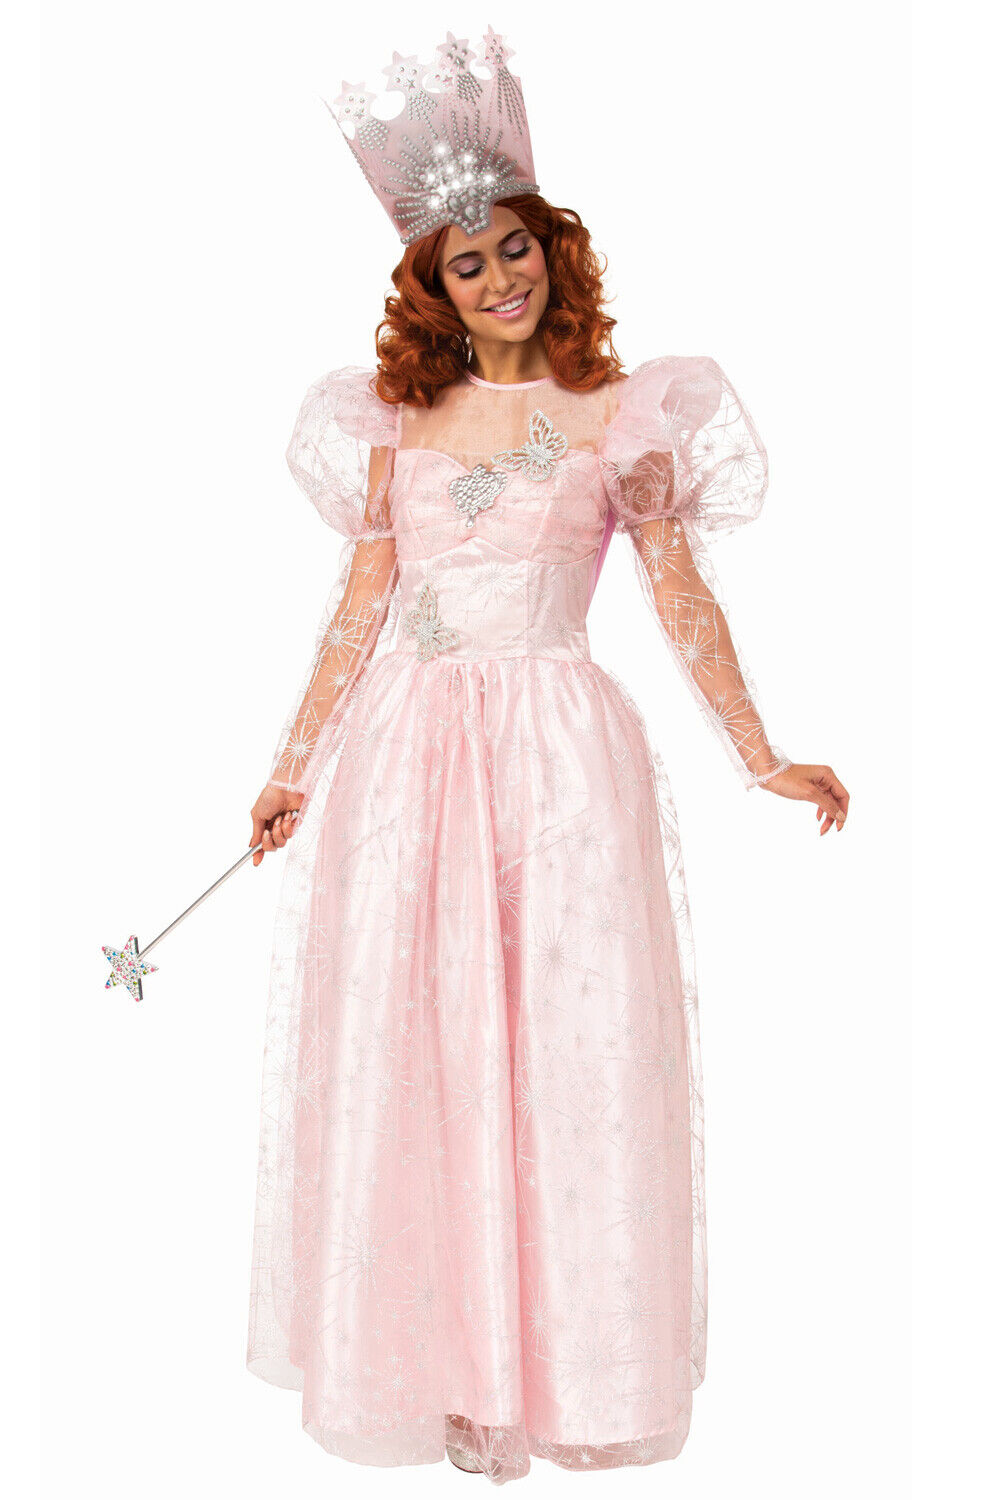 Brand New The Wizard of Oz Glinda the Good Witch Adult Costume